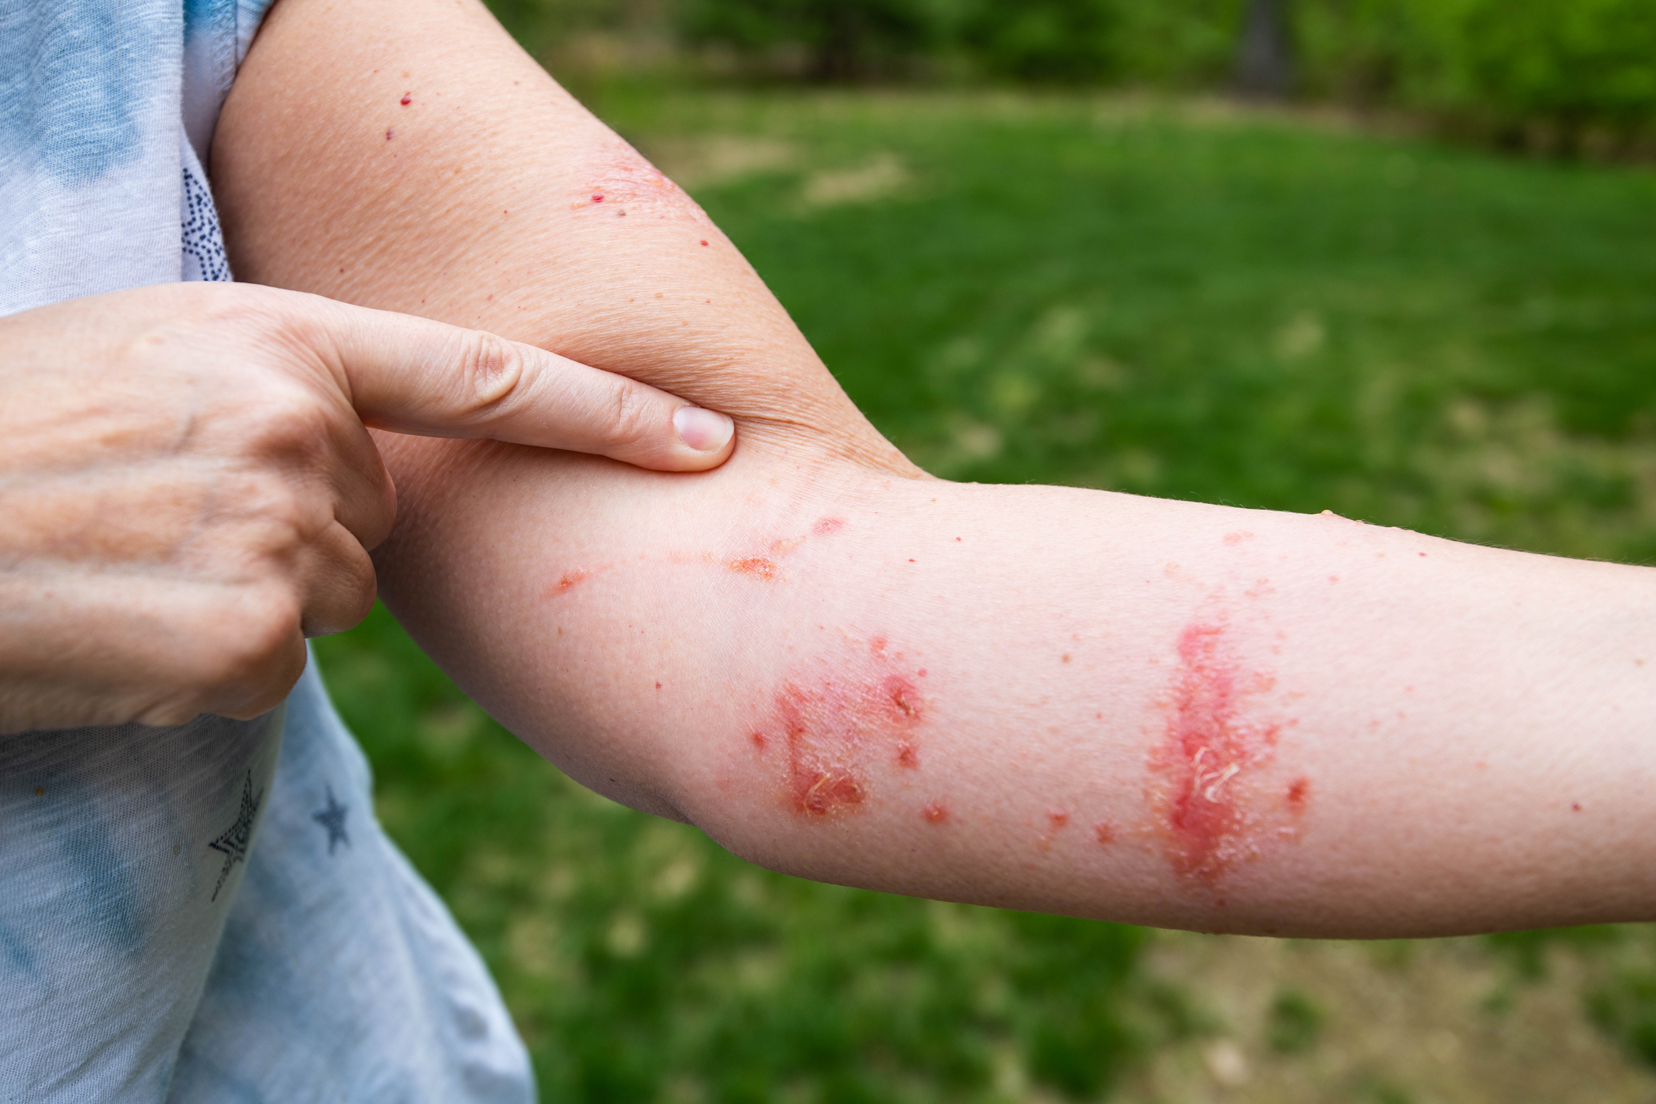 What causes the allergic reaction?